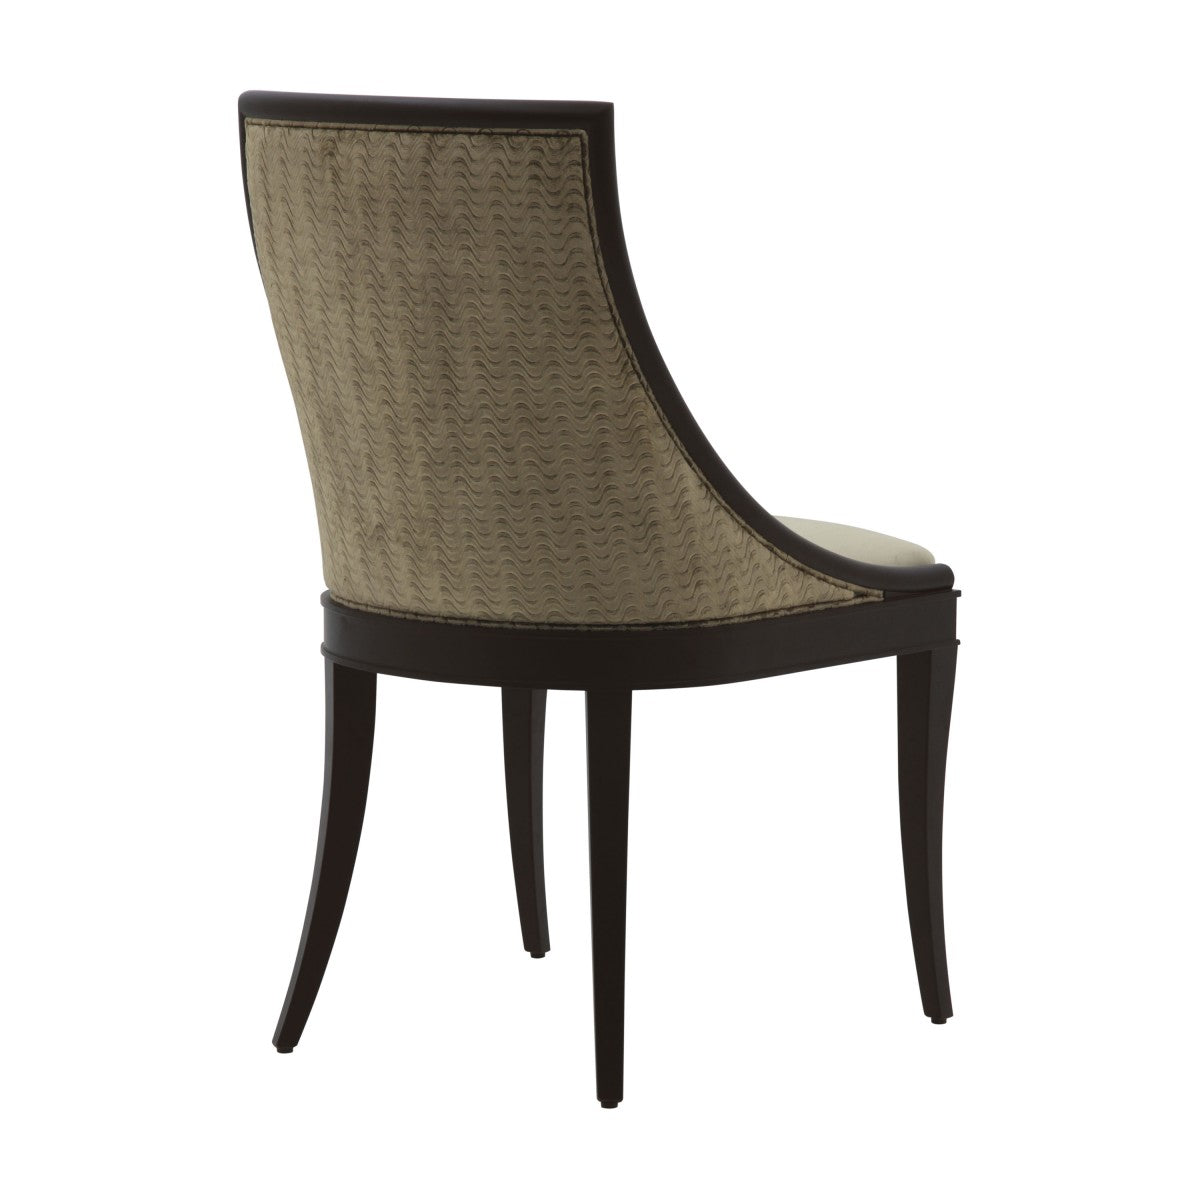 Amina Bespoke Upholstered Modern Contemporary Dining Chair MS434S Custom Made To Order